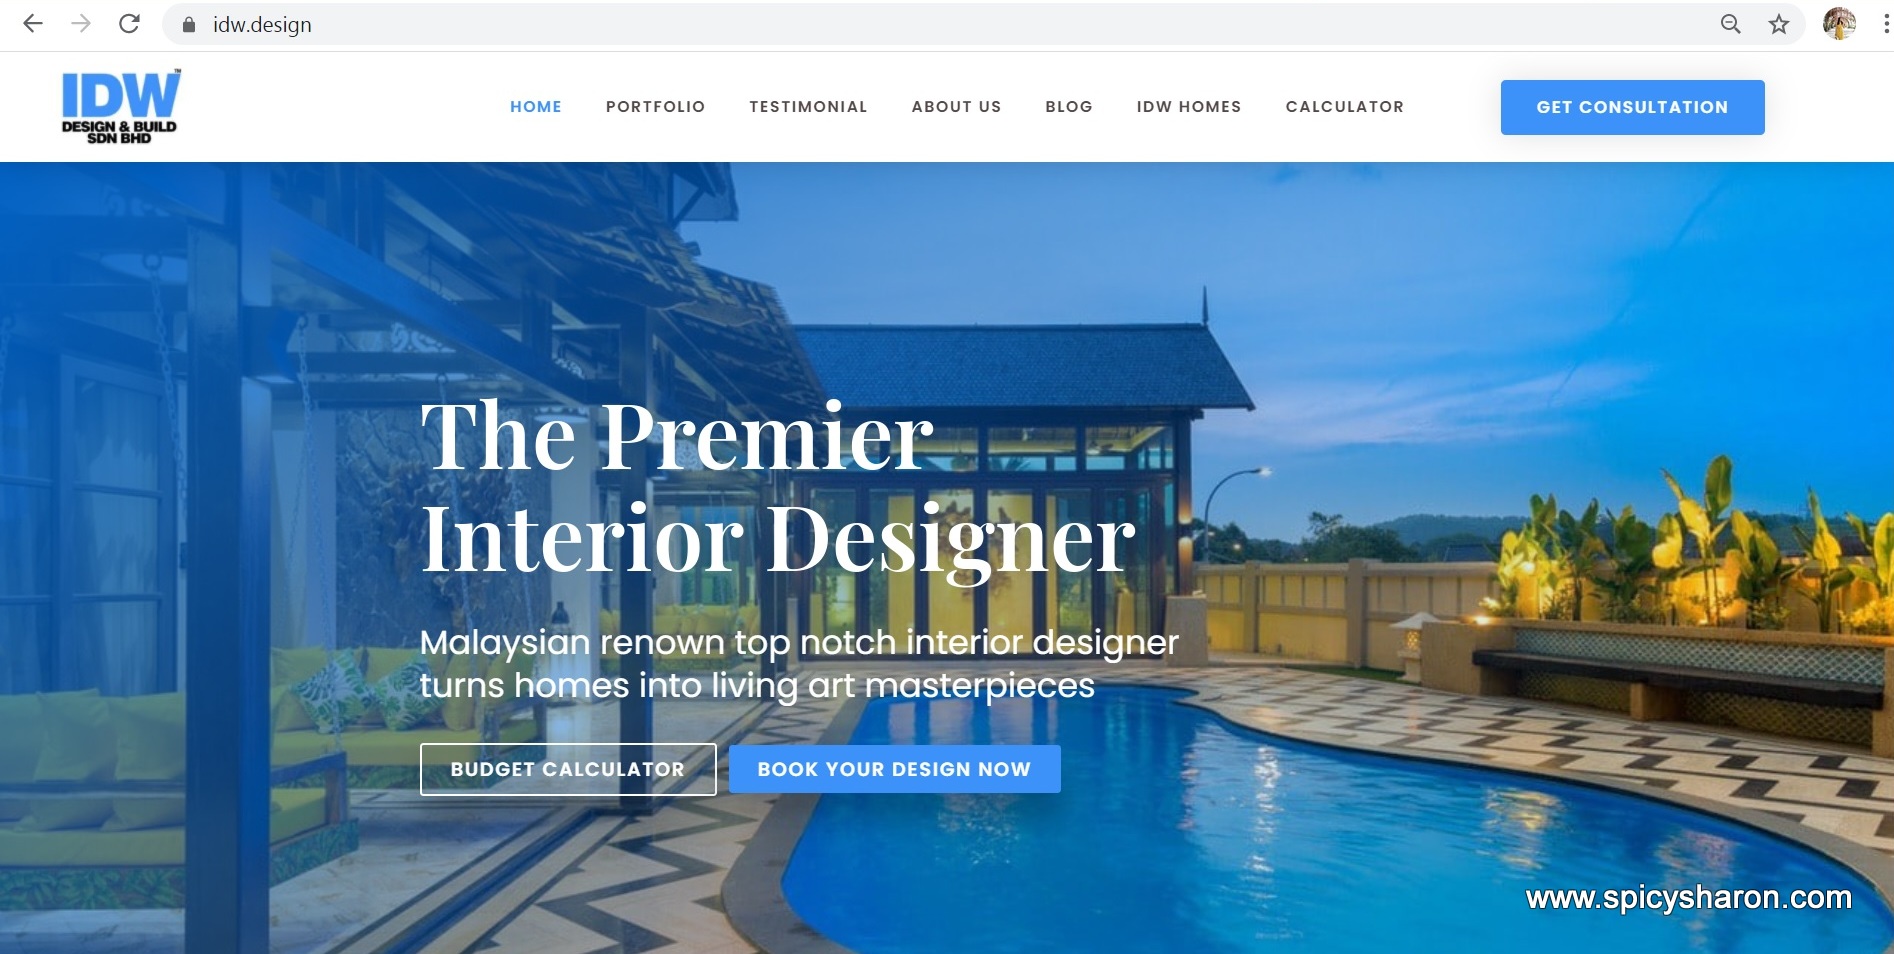 IDW Interior Design In Malaysia Review